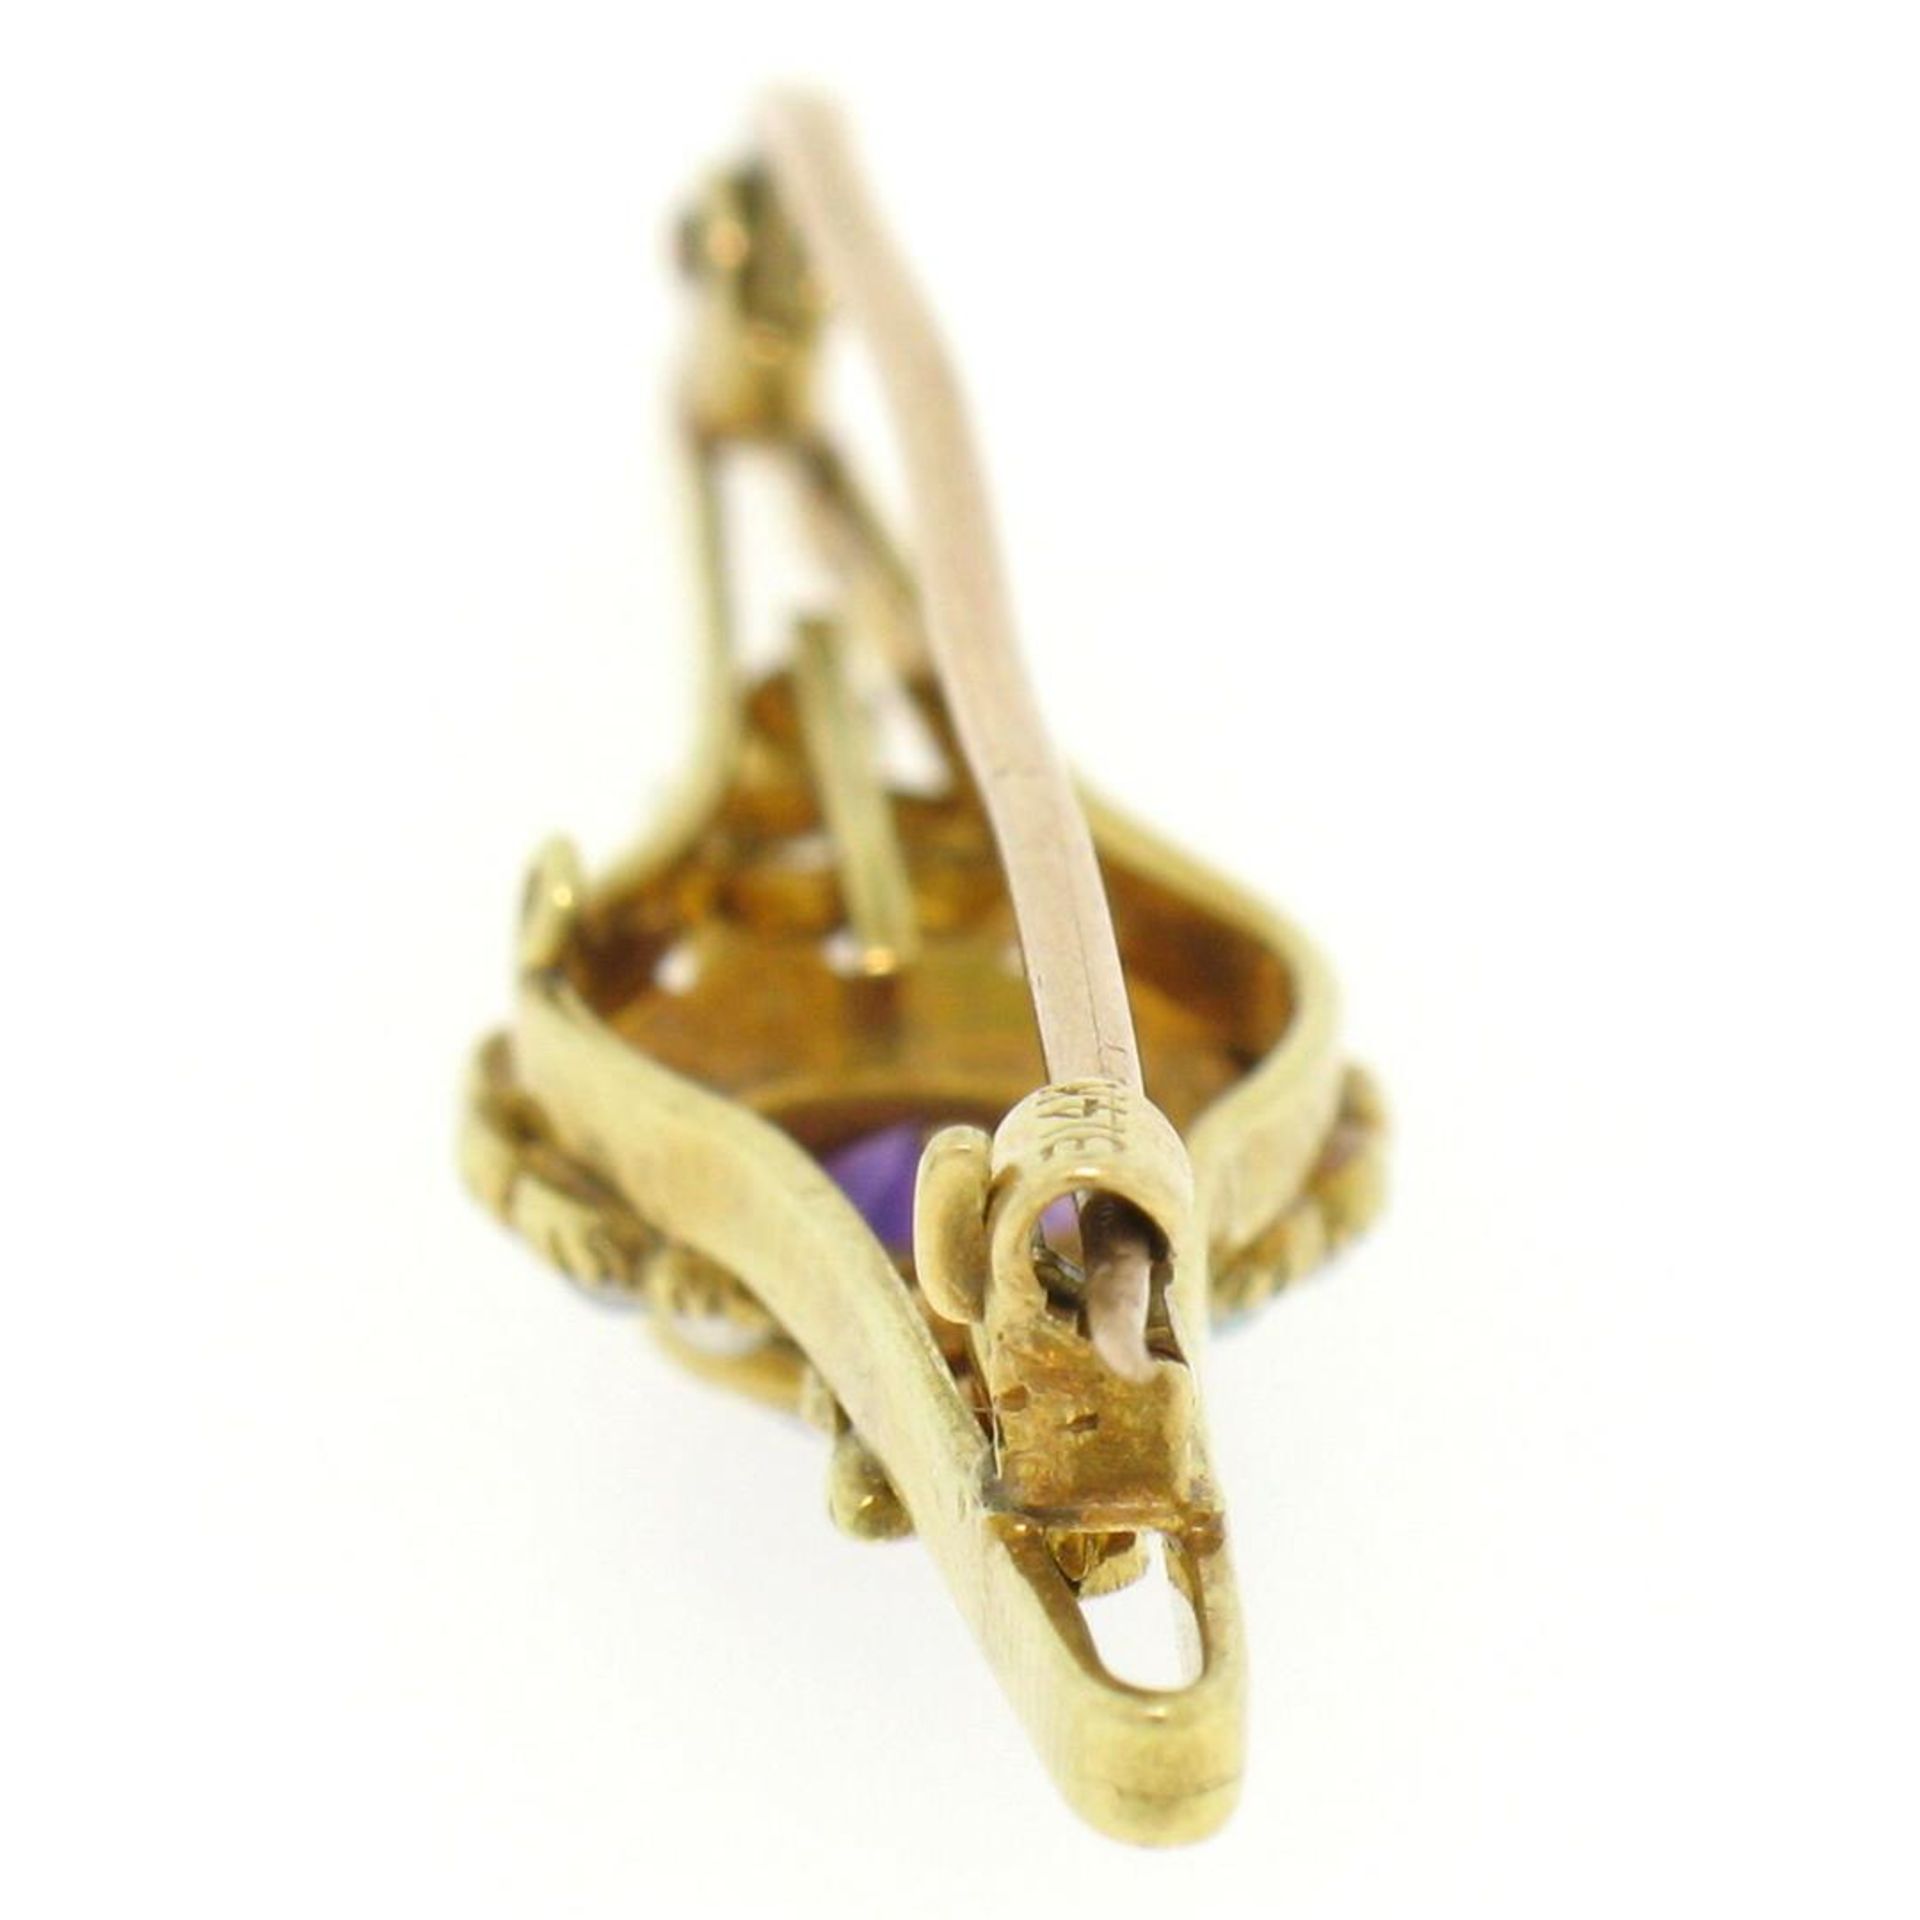 15k Yellow Gold .64 ct Old Cut Amethyst & Seed Pearl Brooch Pin - Image 4 of 8